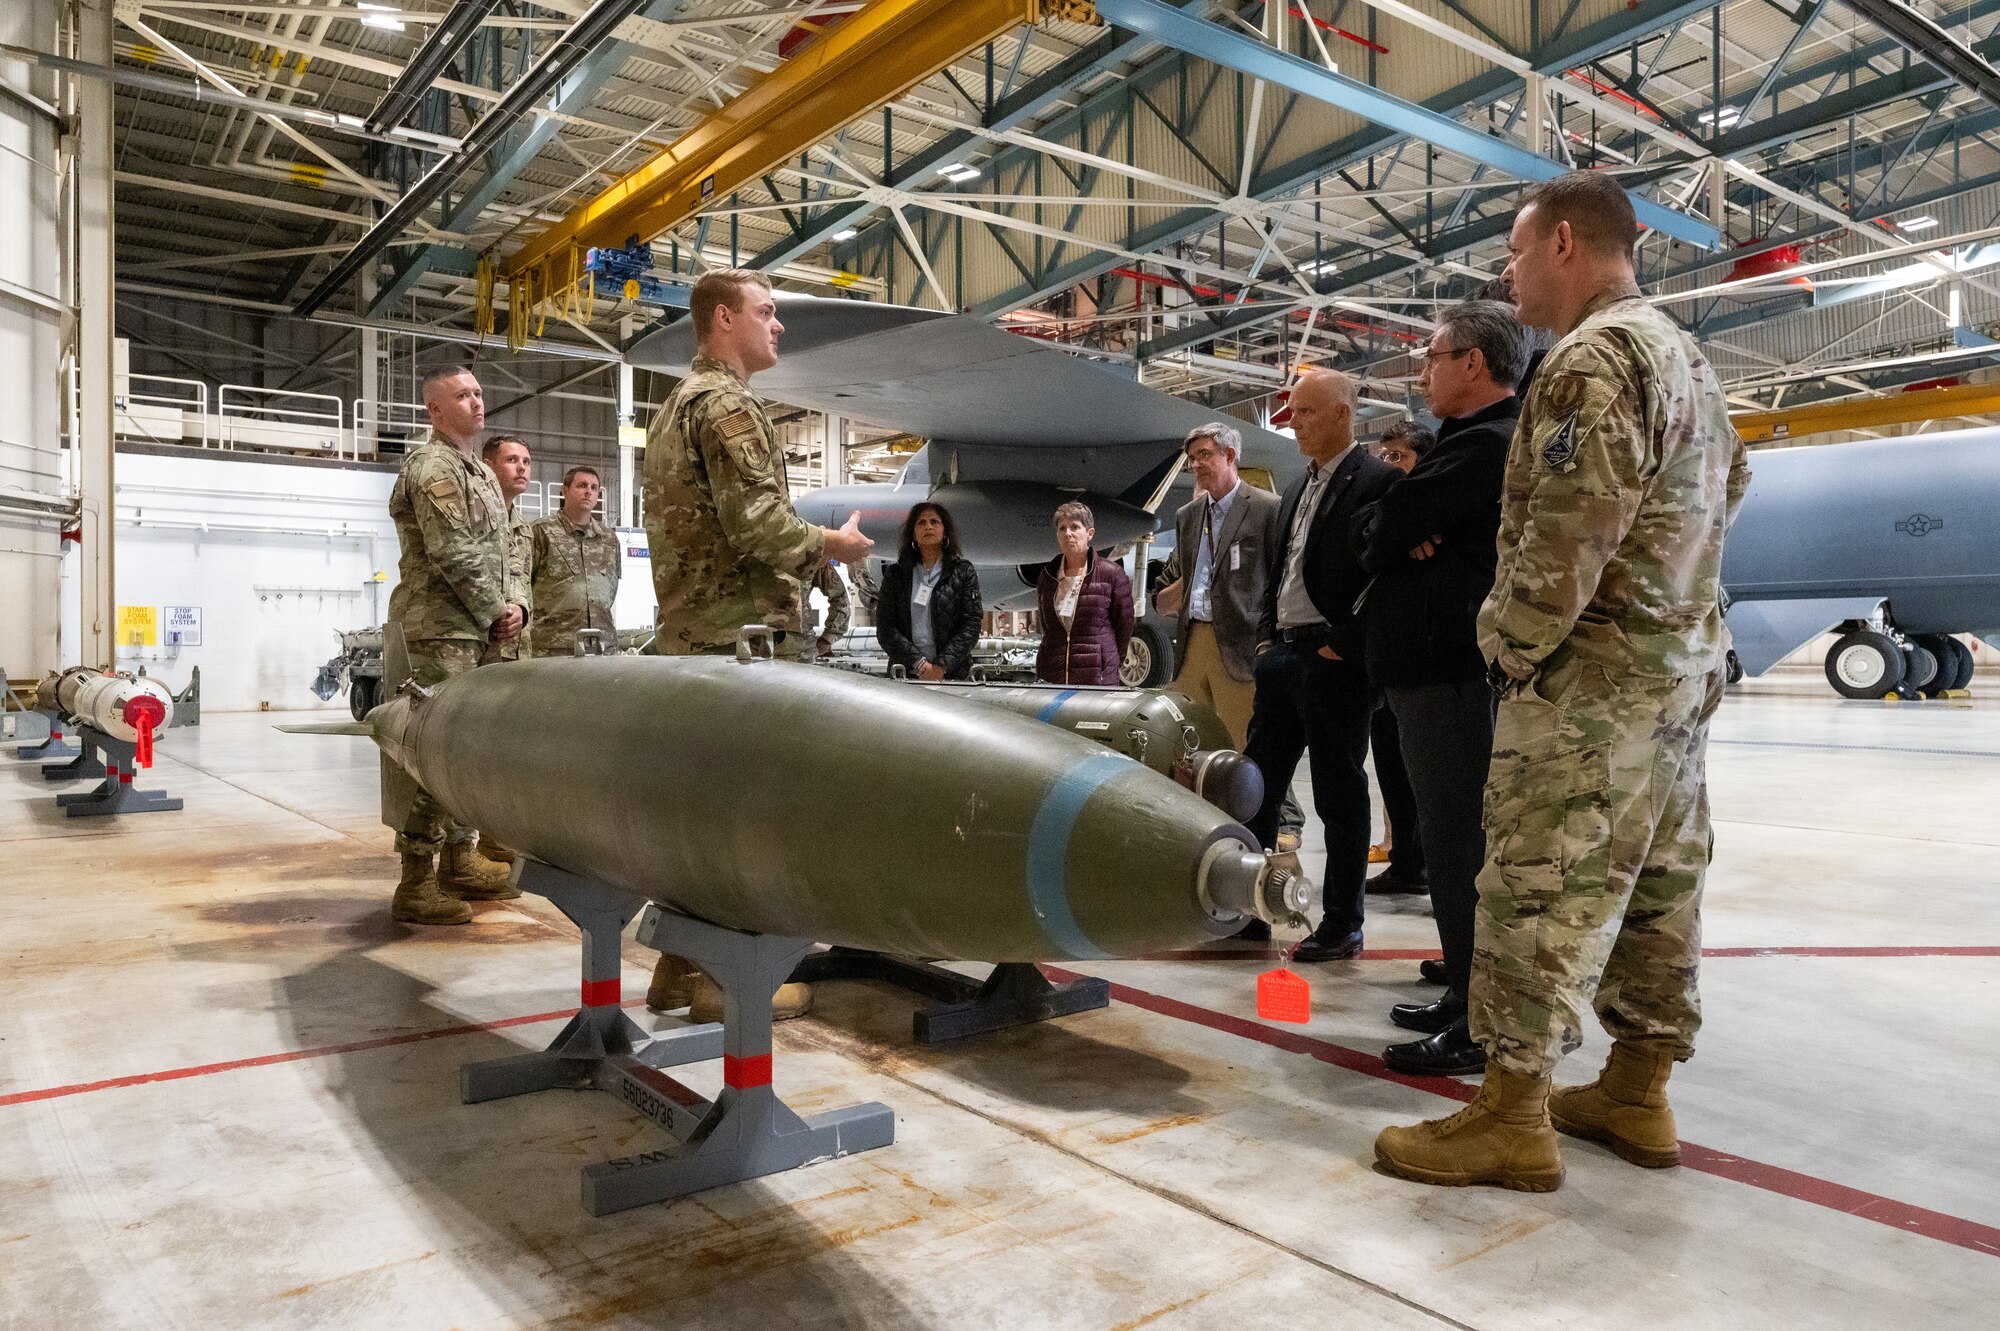 Directors and leaders representing national laboratories from across the U.S. interact with munitions maintenance Airmen near inert training munitions at Minot Air Force Base during a tour of Air Force Global Strike Command installations, October 18, 2023. Gen. Thomas Bussiere, commander of AFGSC, invited the directors for an immersion in the weapons systems and mission of the command while also getting to interact with the Airmen who operate two-thirds of the nuclear enterprise. As critically important partners of AFGSC, the laboratories develop technologies crucial to the U.S. and its future forces. (U.S. Air Force photo by Capt. Joshua Thompson)